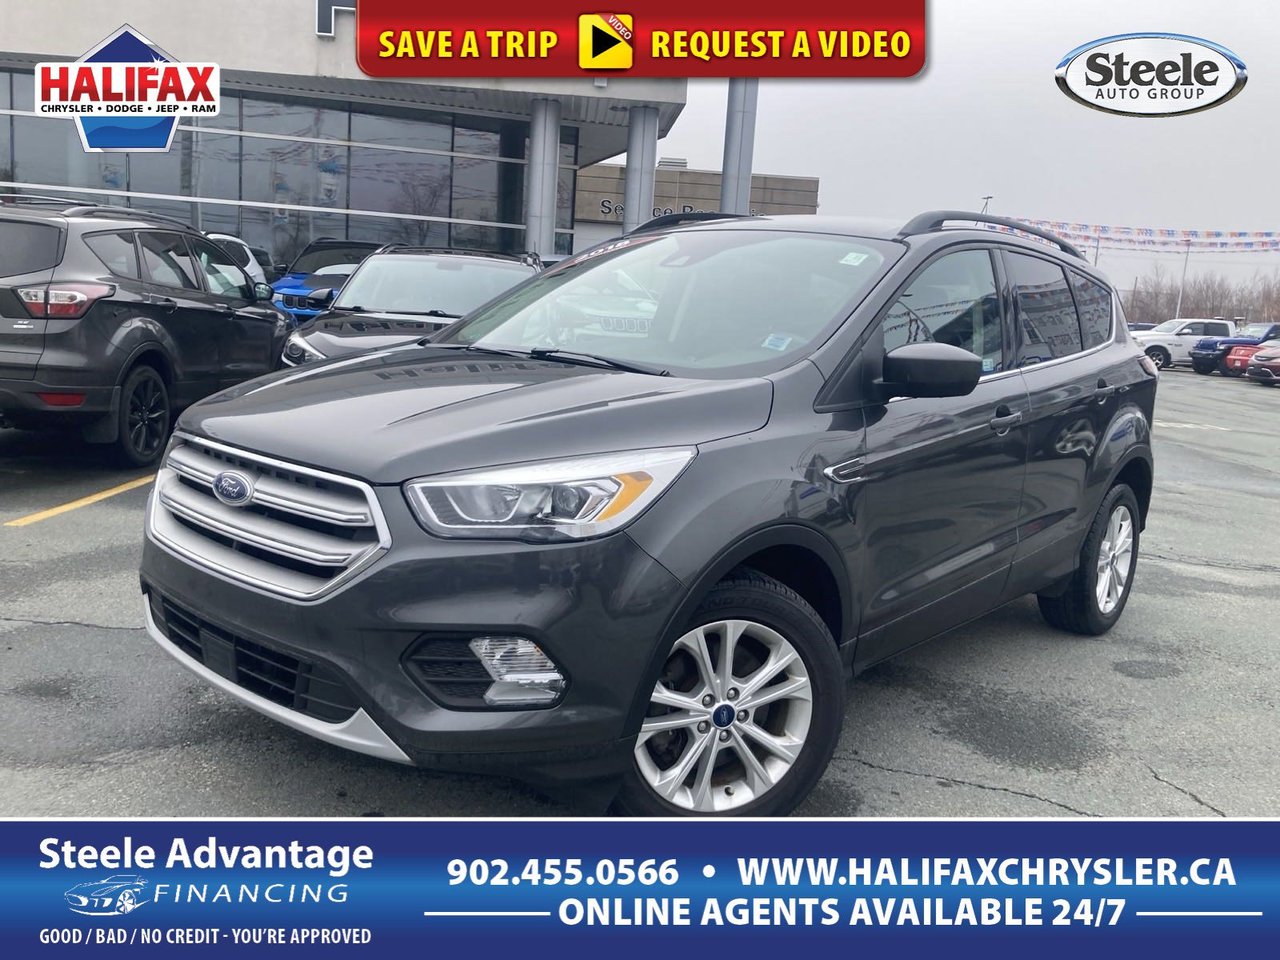 2018 Ford Escape SEL - LOW KM, 4WD, HEATED LEATHER SEATS, ONE OWNER, SAFETY FEATURES-0